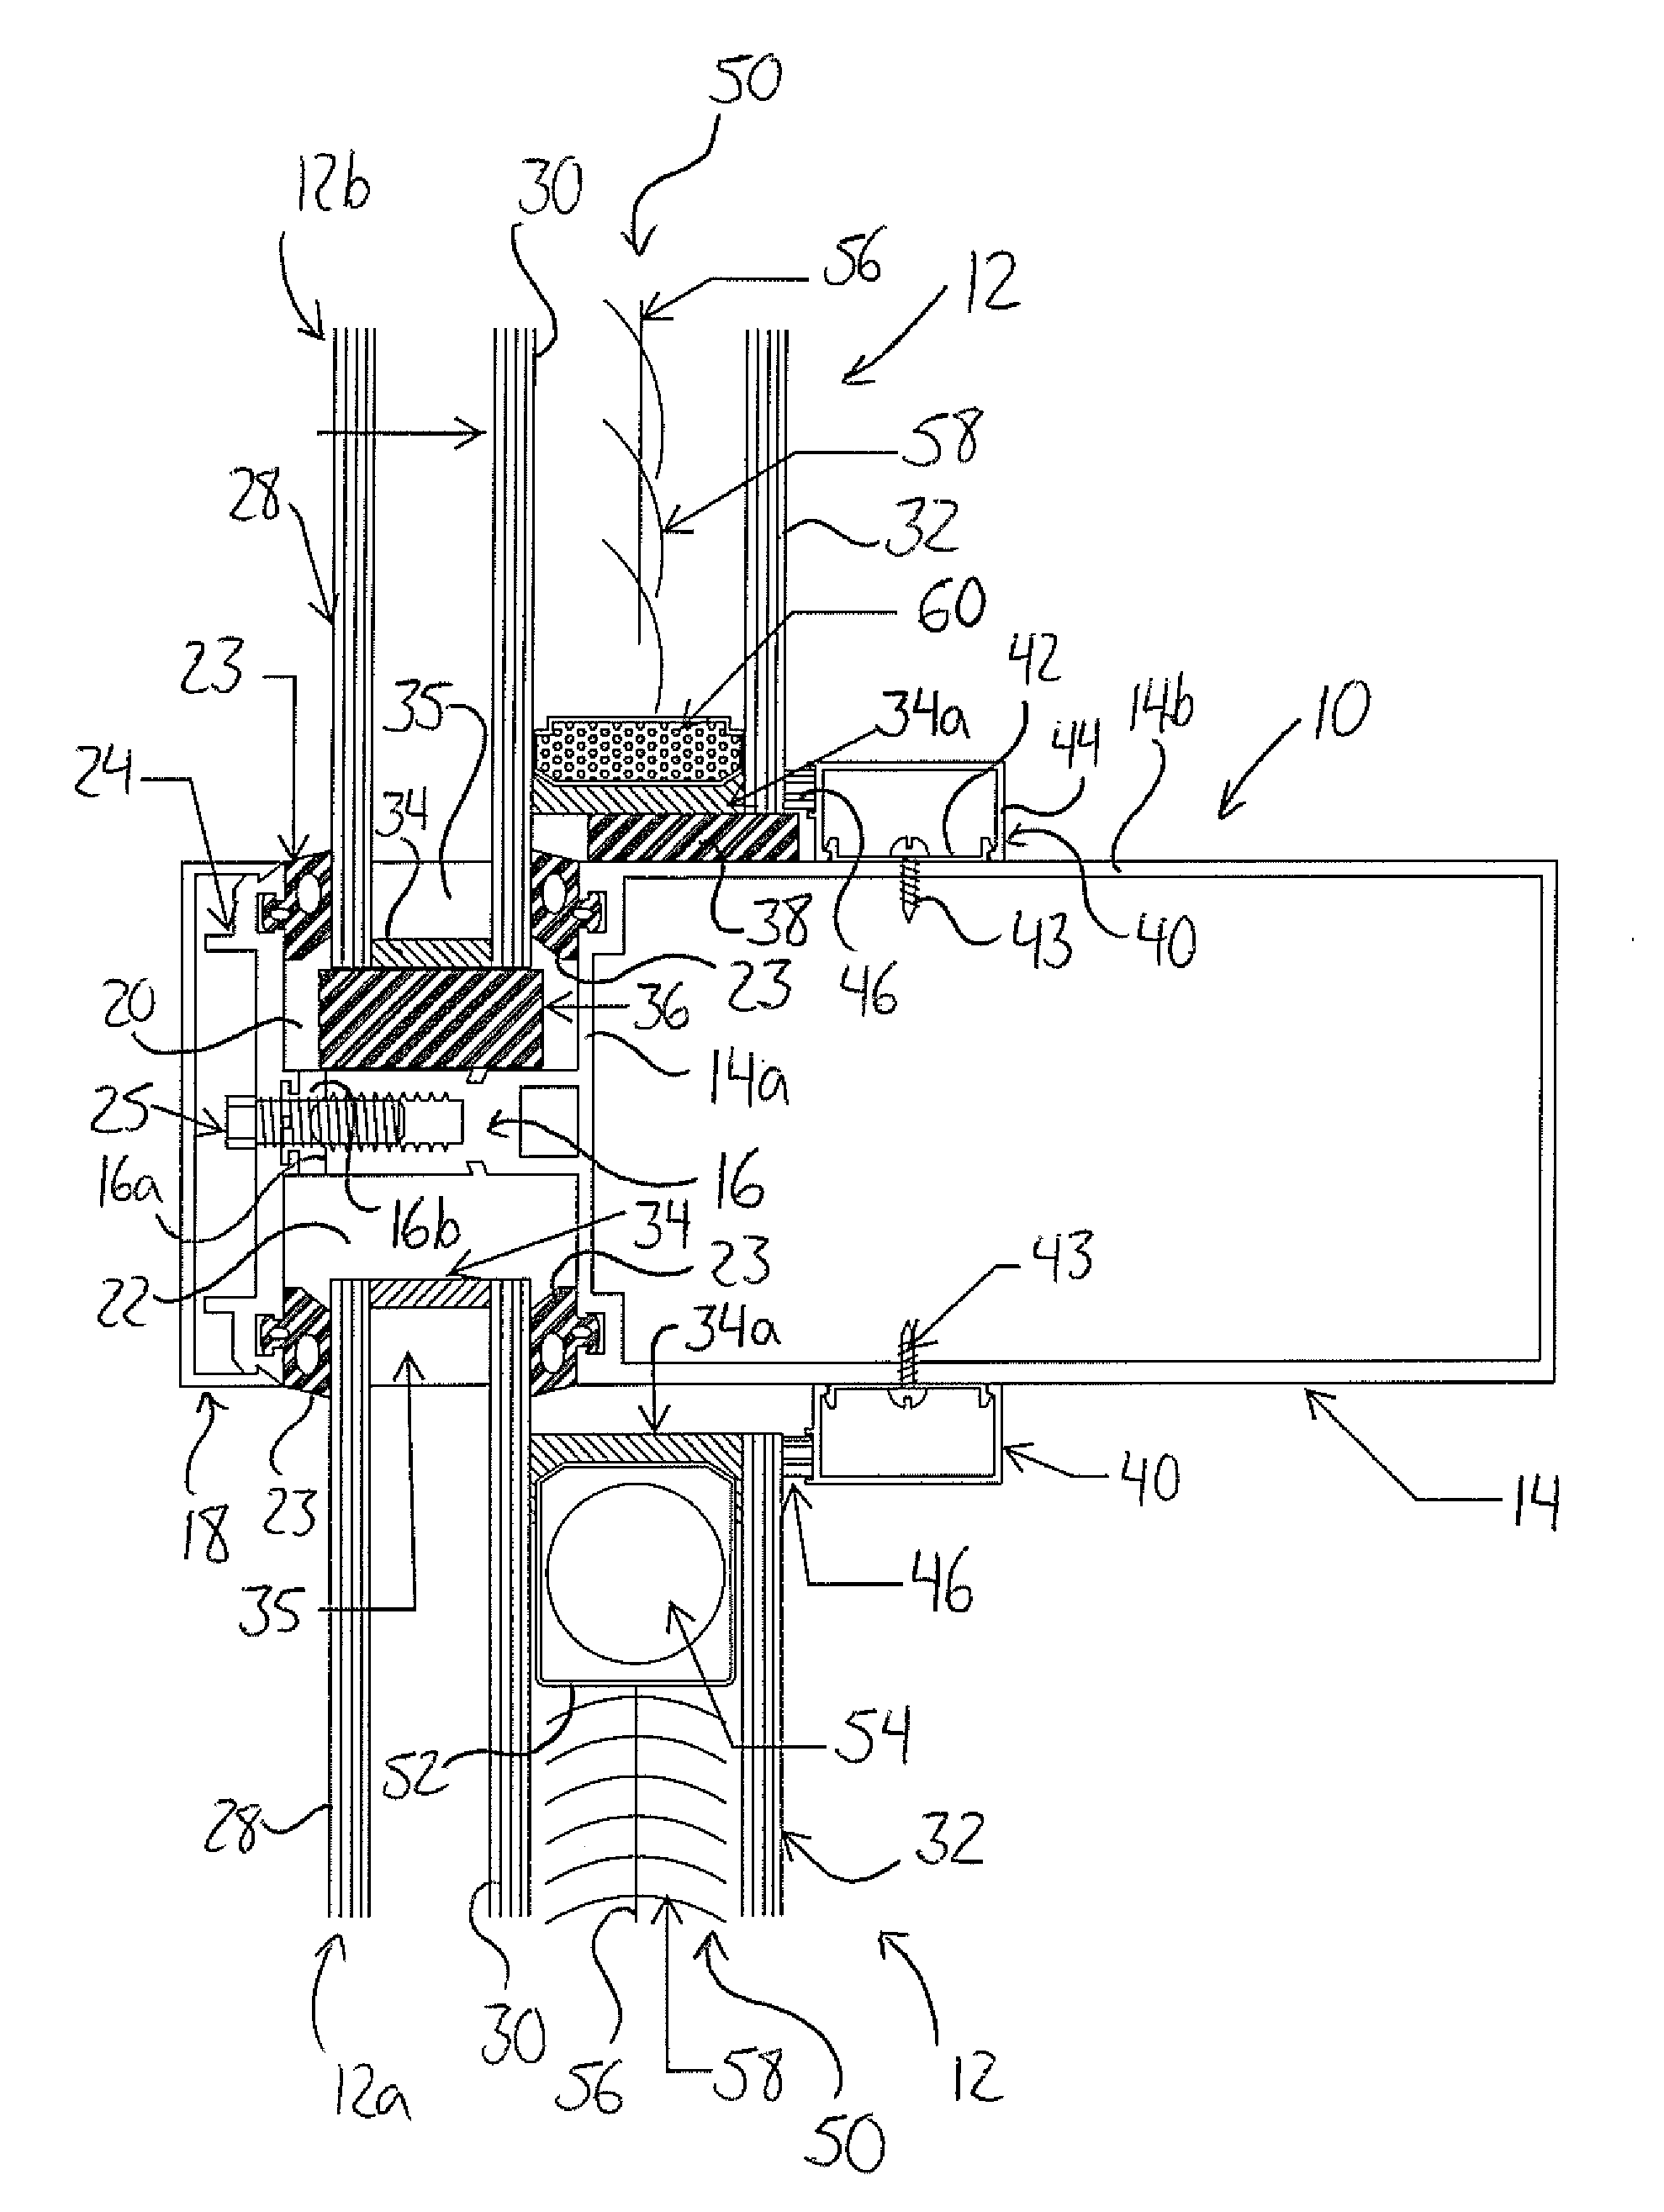 Sealed Glass Unit and Method for Upgrading an Existing Curtain Wall